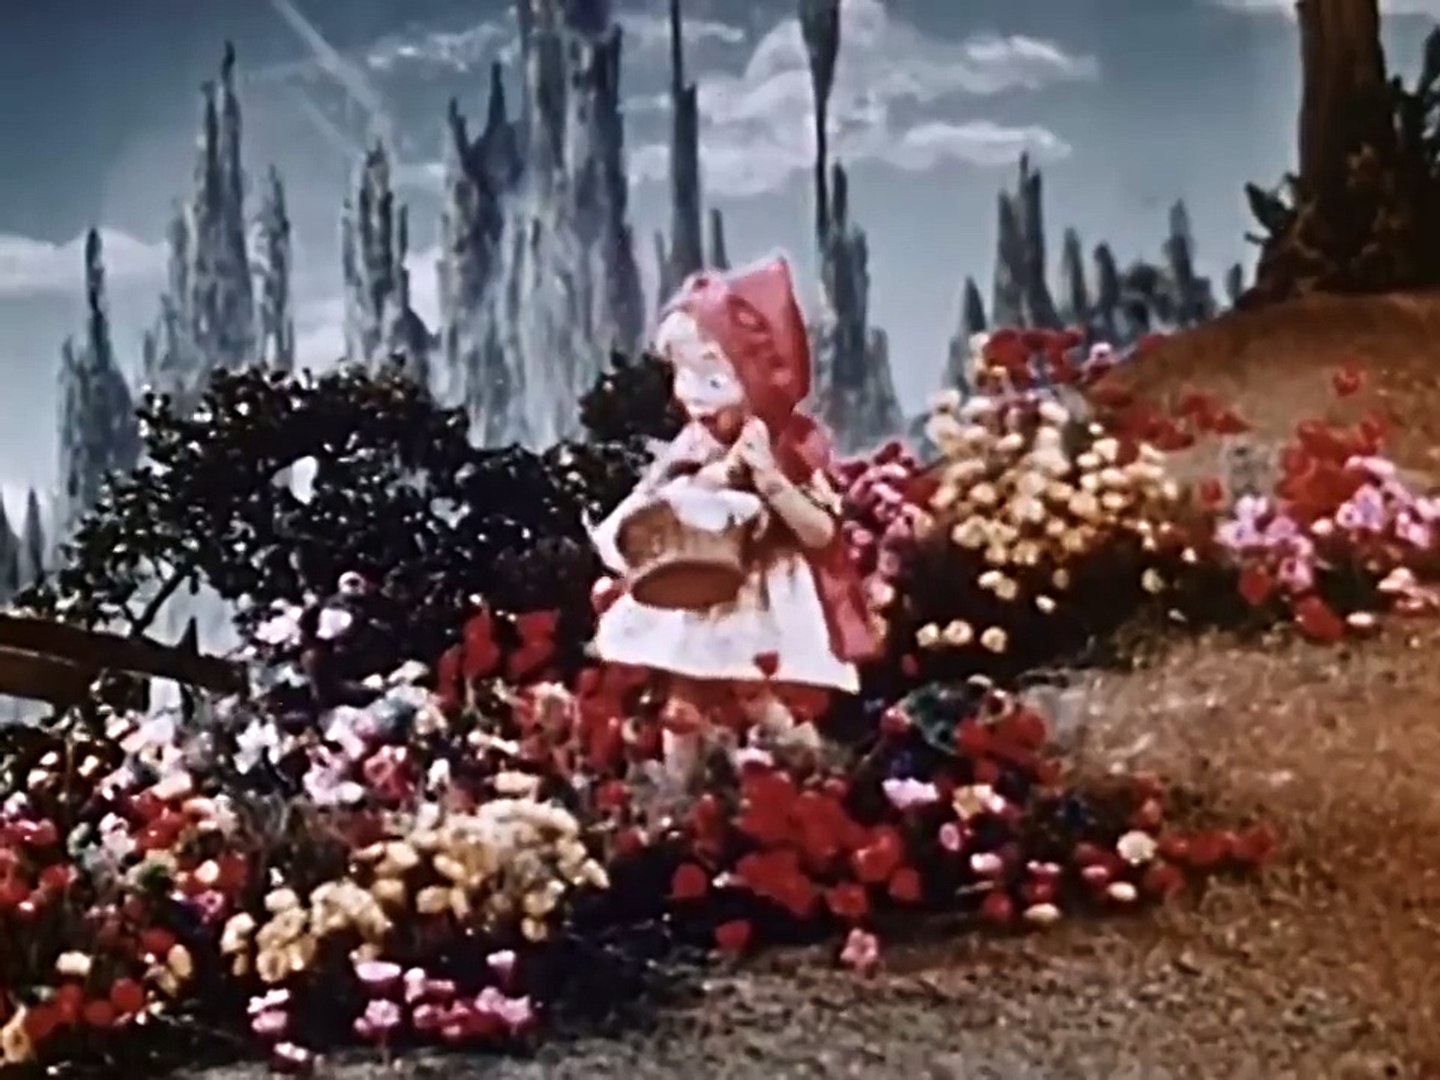 Little Red Riding Hood 1949 Ray Harryhausen Animation in Color; Stop-Motion Fairy  Tale Classic - Vídeo Dailymotion